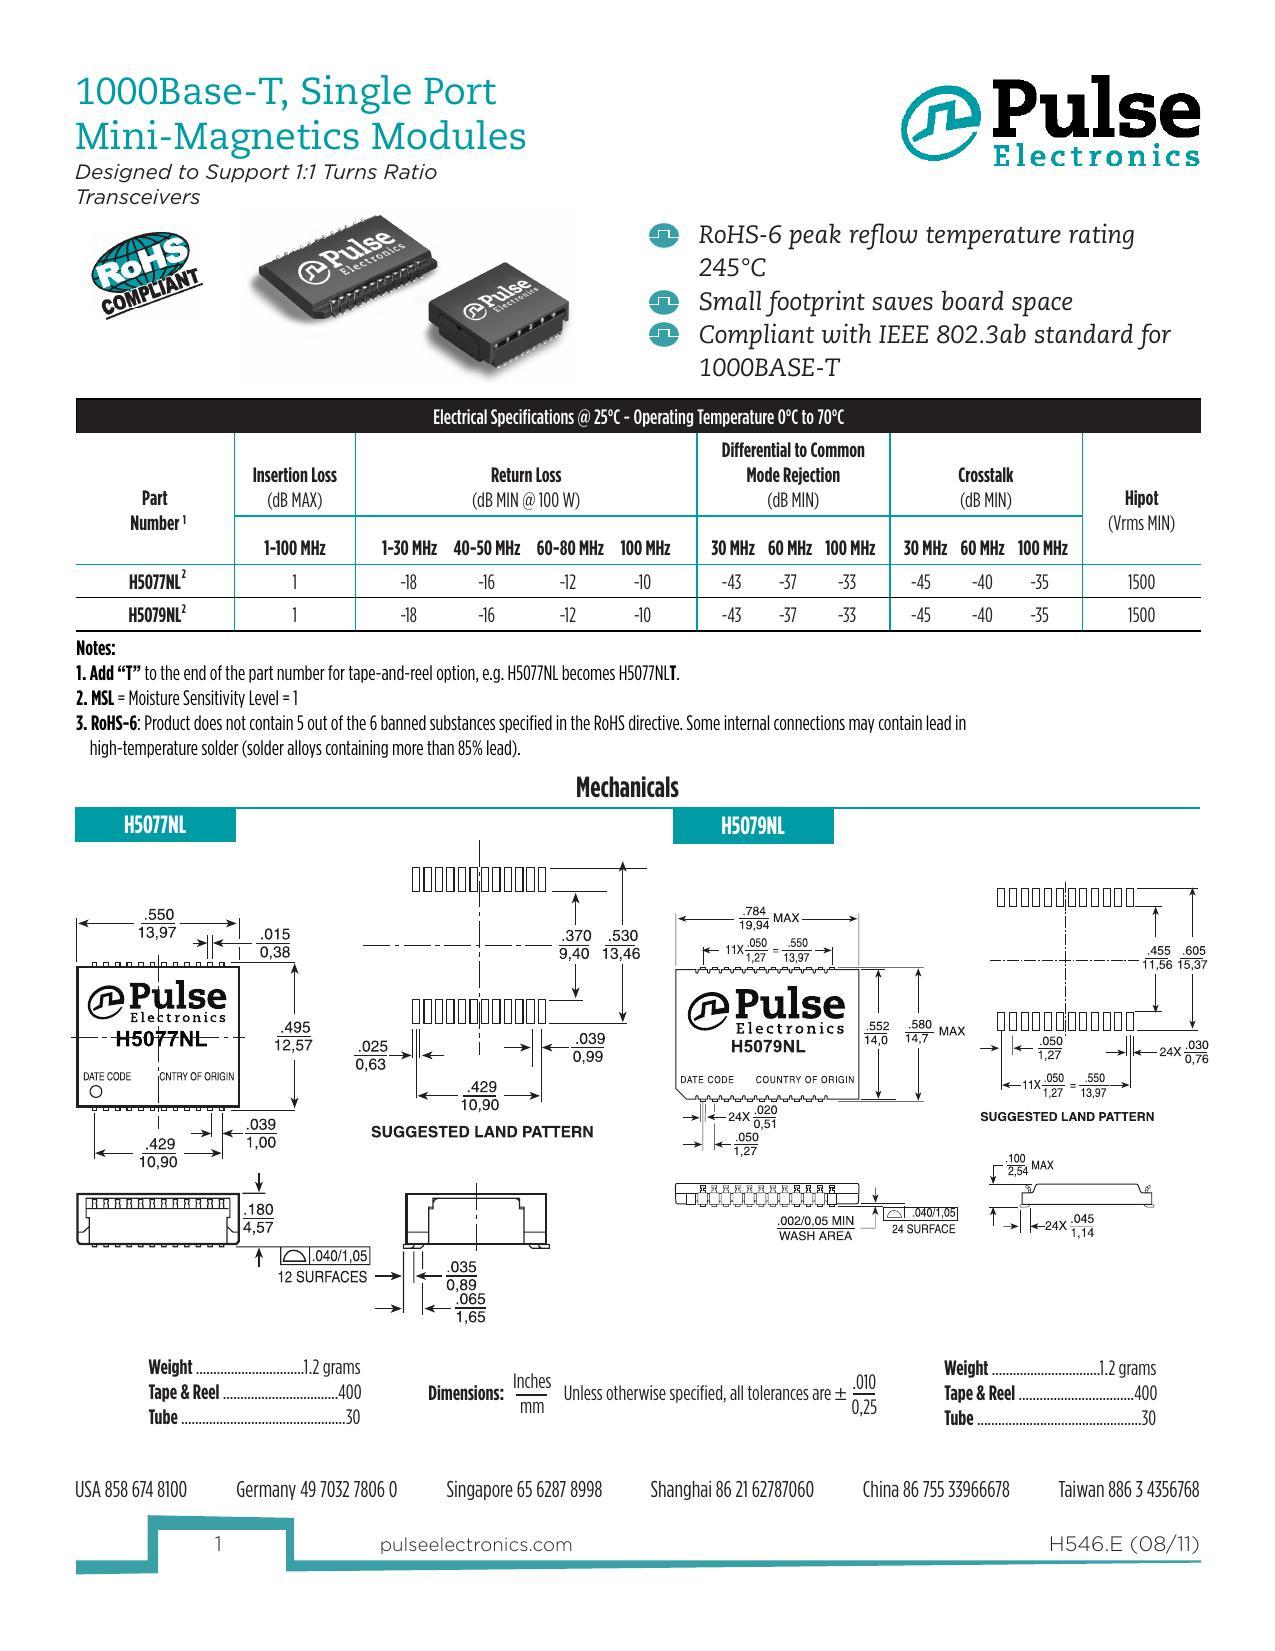 10oobase-t-single-port-mini-magnetics-modules-designed-to-support-11-turns-ratio-transceivers.pdf